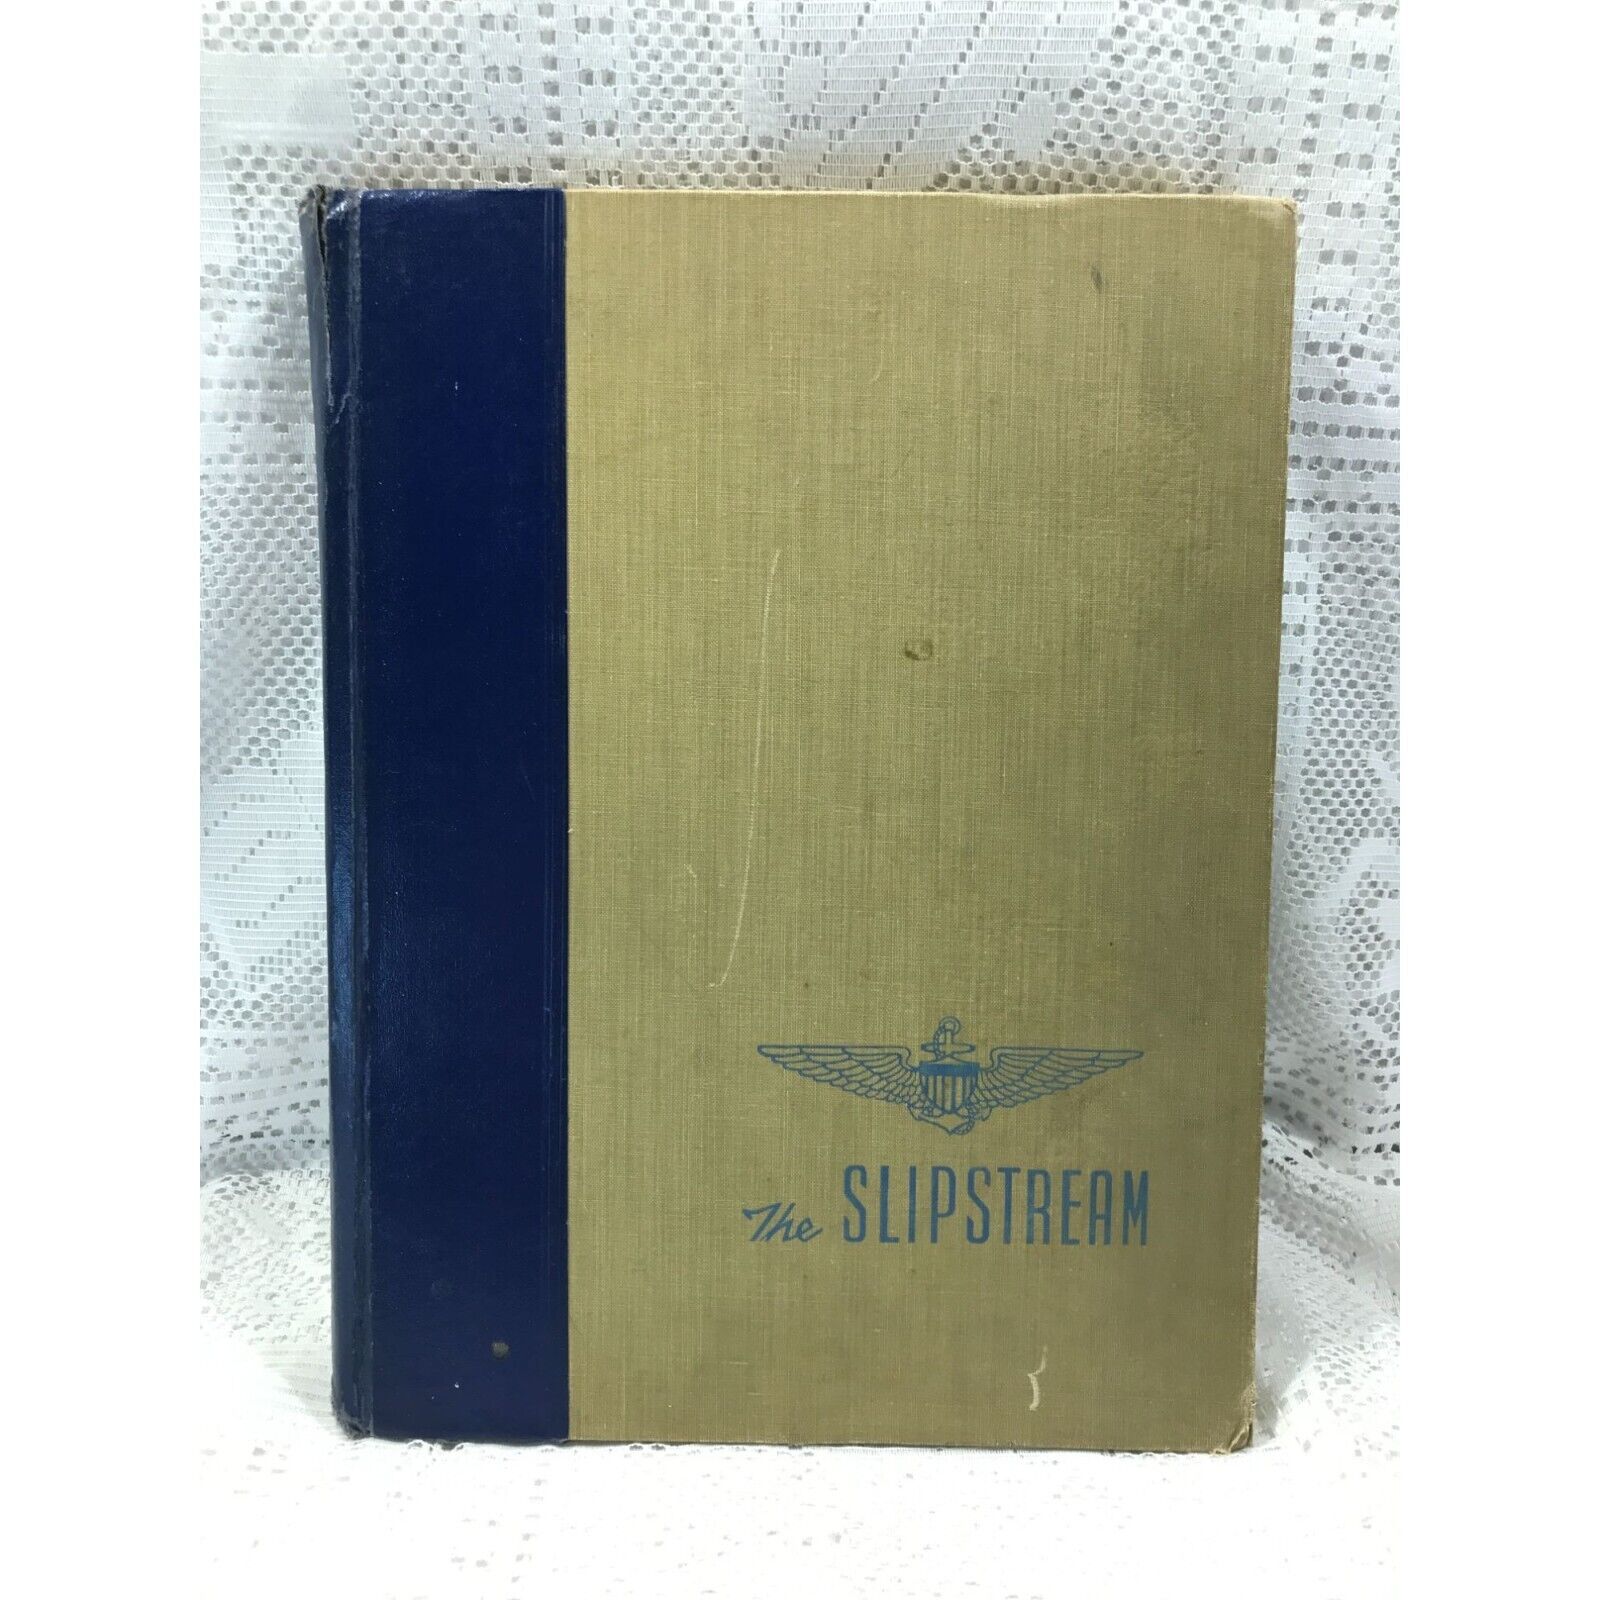 The Slipstream, mark v edition, US Naval Aviation at War, 1944 Navy Yearbook